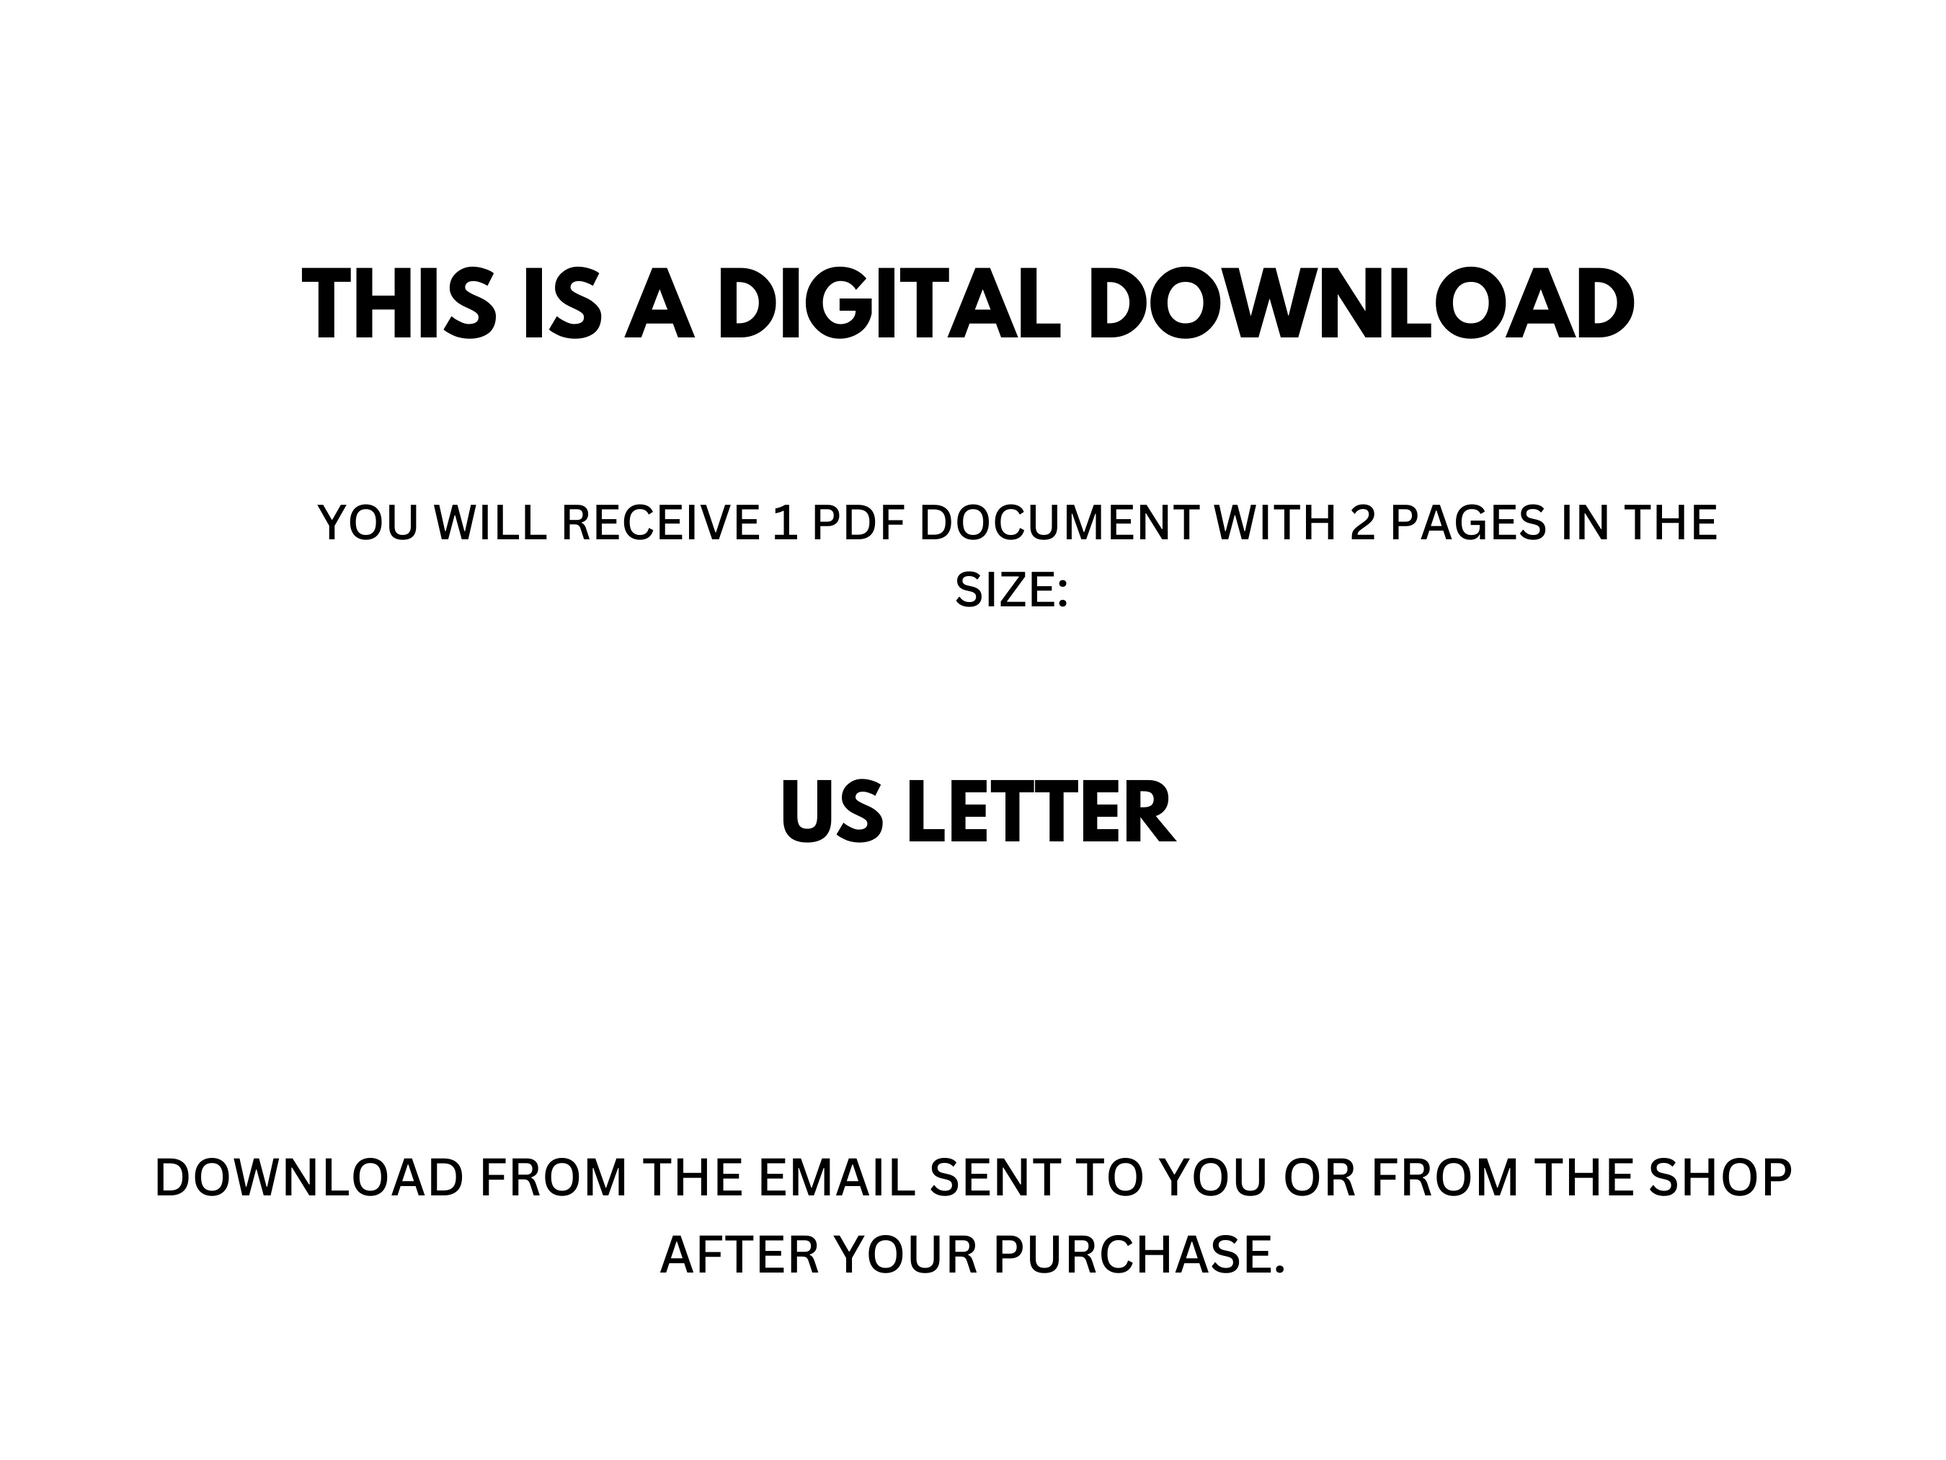 A statement that the product is a digital download in the size US letter.